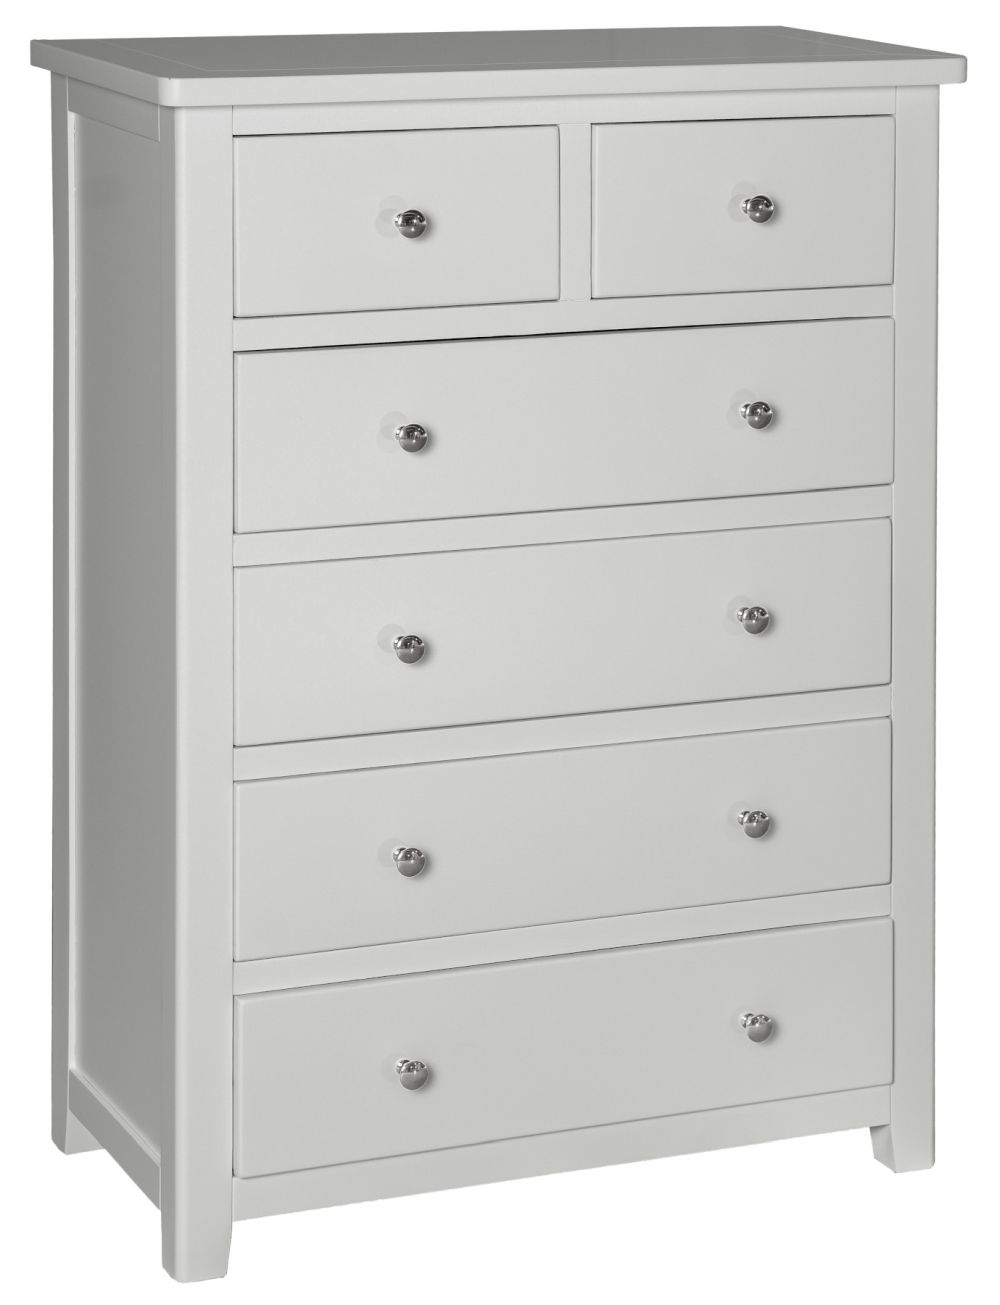 Henley Grey Painted 24 Drawer Chest